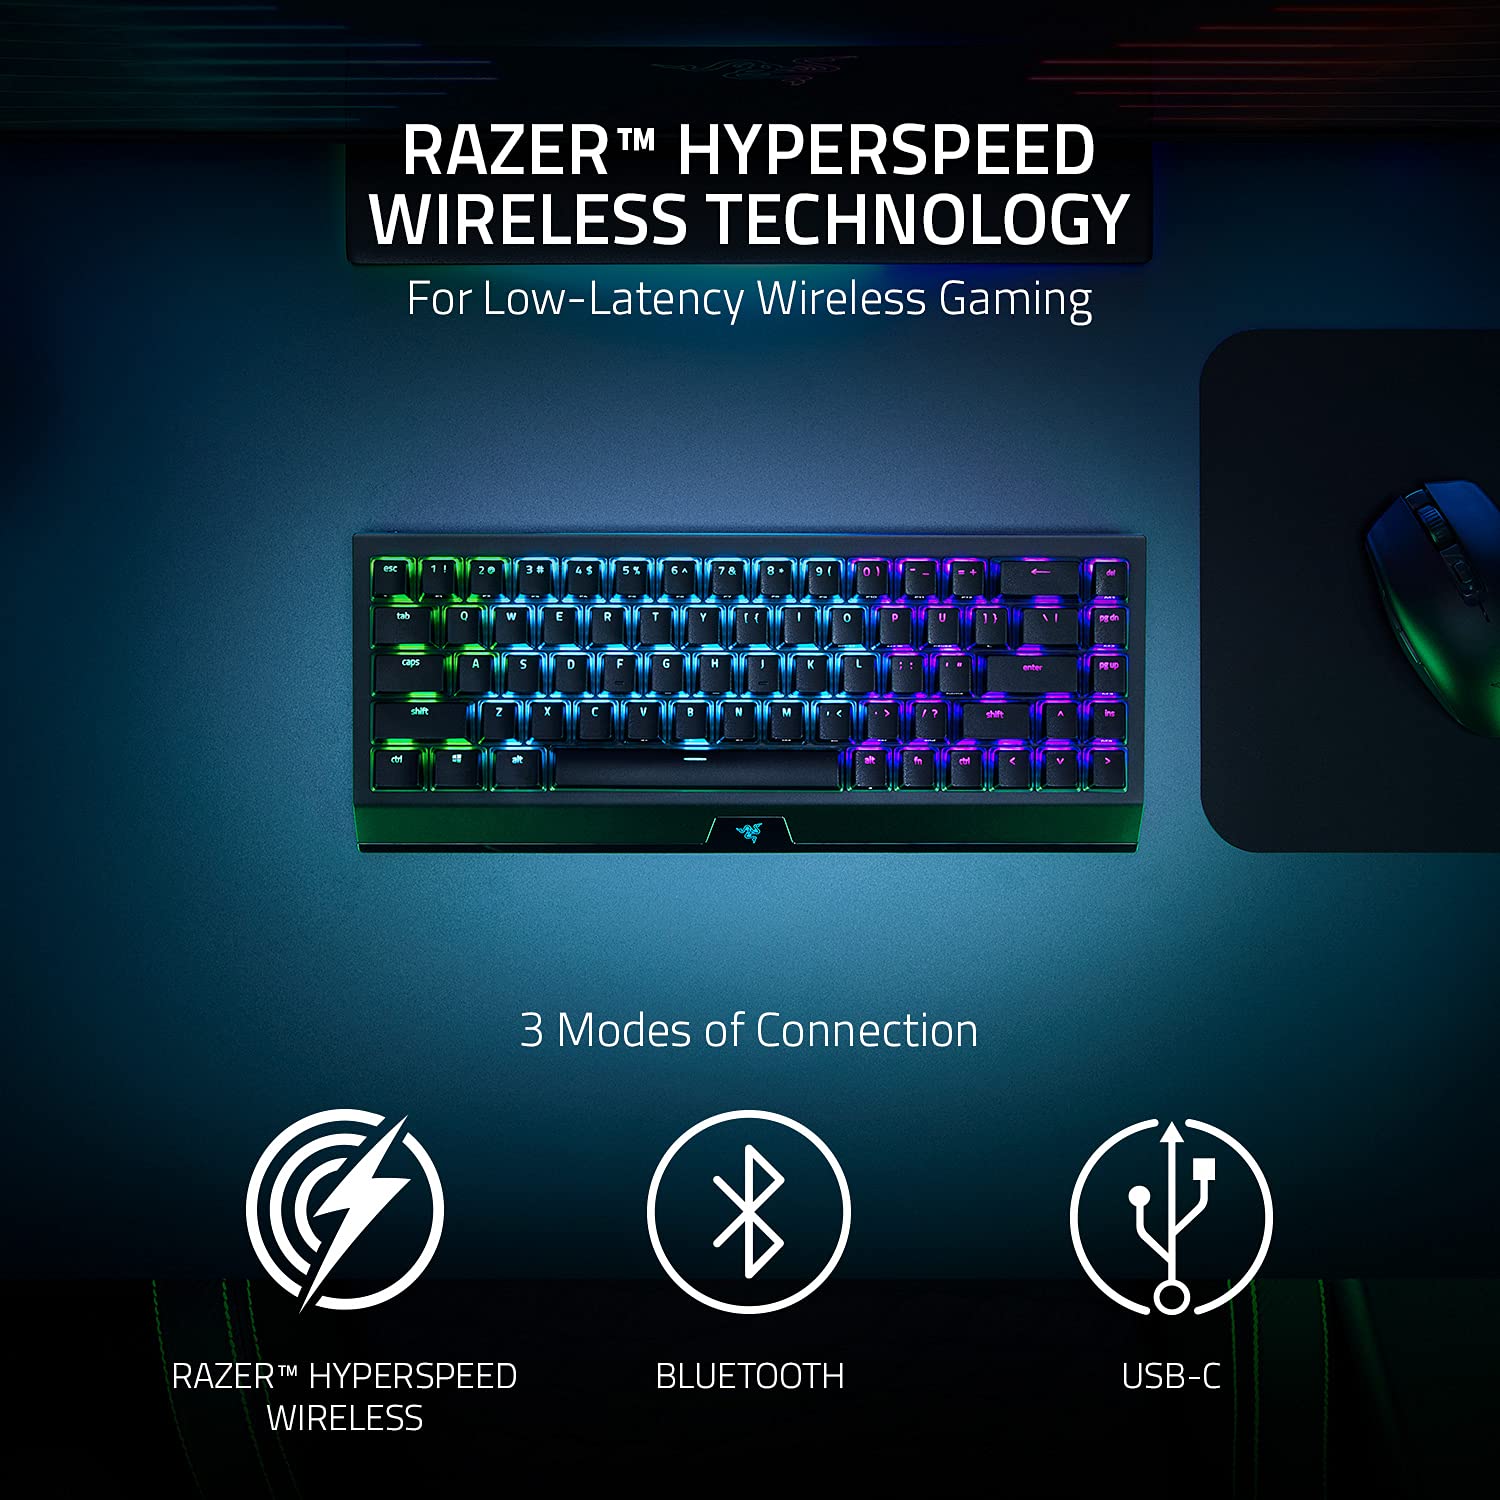 Razer BlackWidow V3 Mini HyperSpeed 65% Wireless Mechanical Gaming Keyboard: HyperSpeed Wireless Technology -Green Mechanical Switches- Tactile & Clicky - Phantom Pudding Keycaps - 200Hrs Battery Life